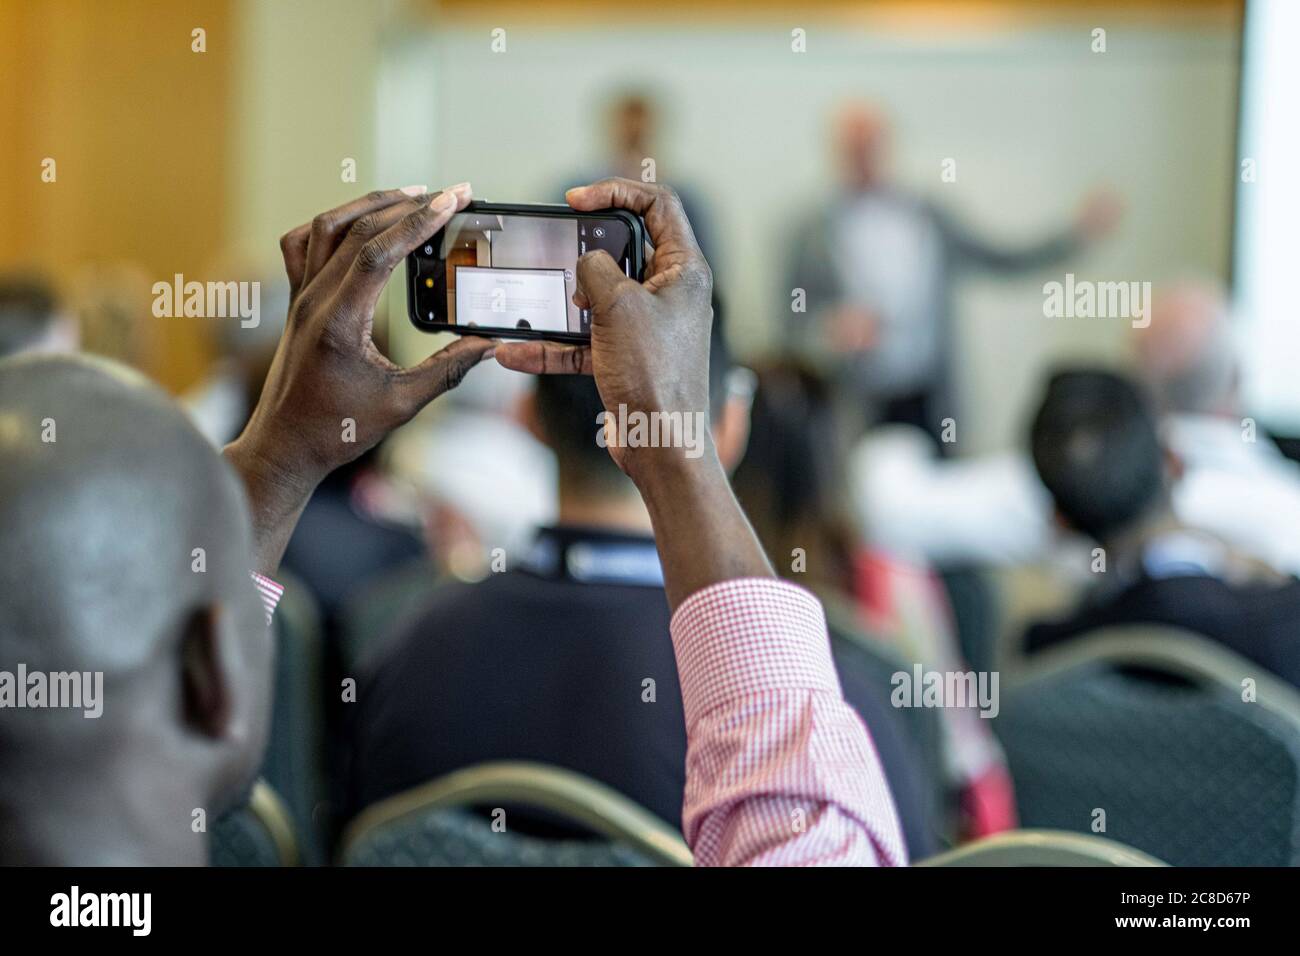 Filming A Business Conference Event With A Smartphone Stock Photo